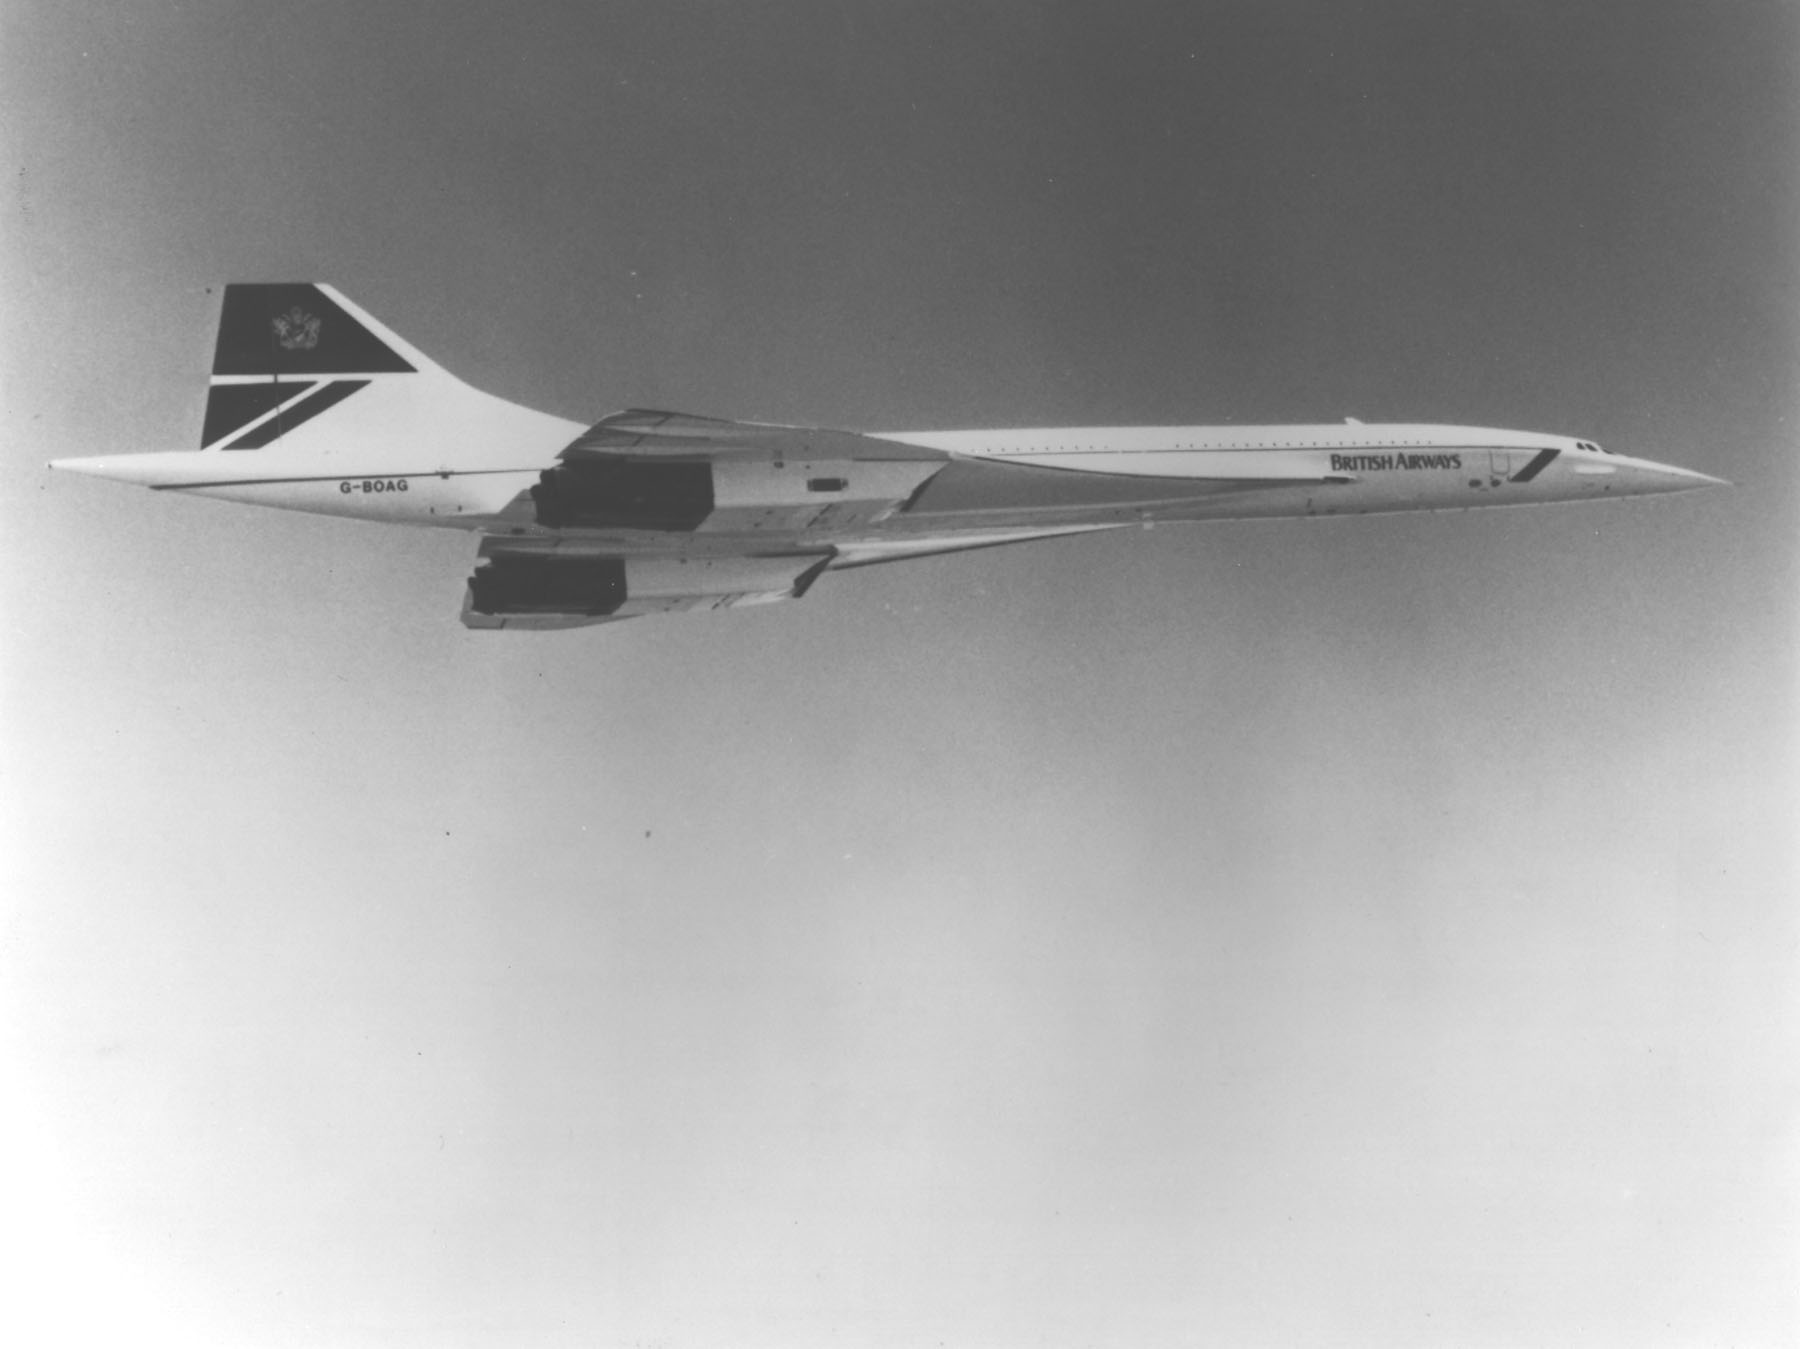 The Concorde needed a delta wing to achieve its high, sustained cruising speed of Mach 2